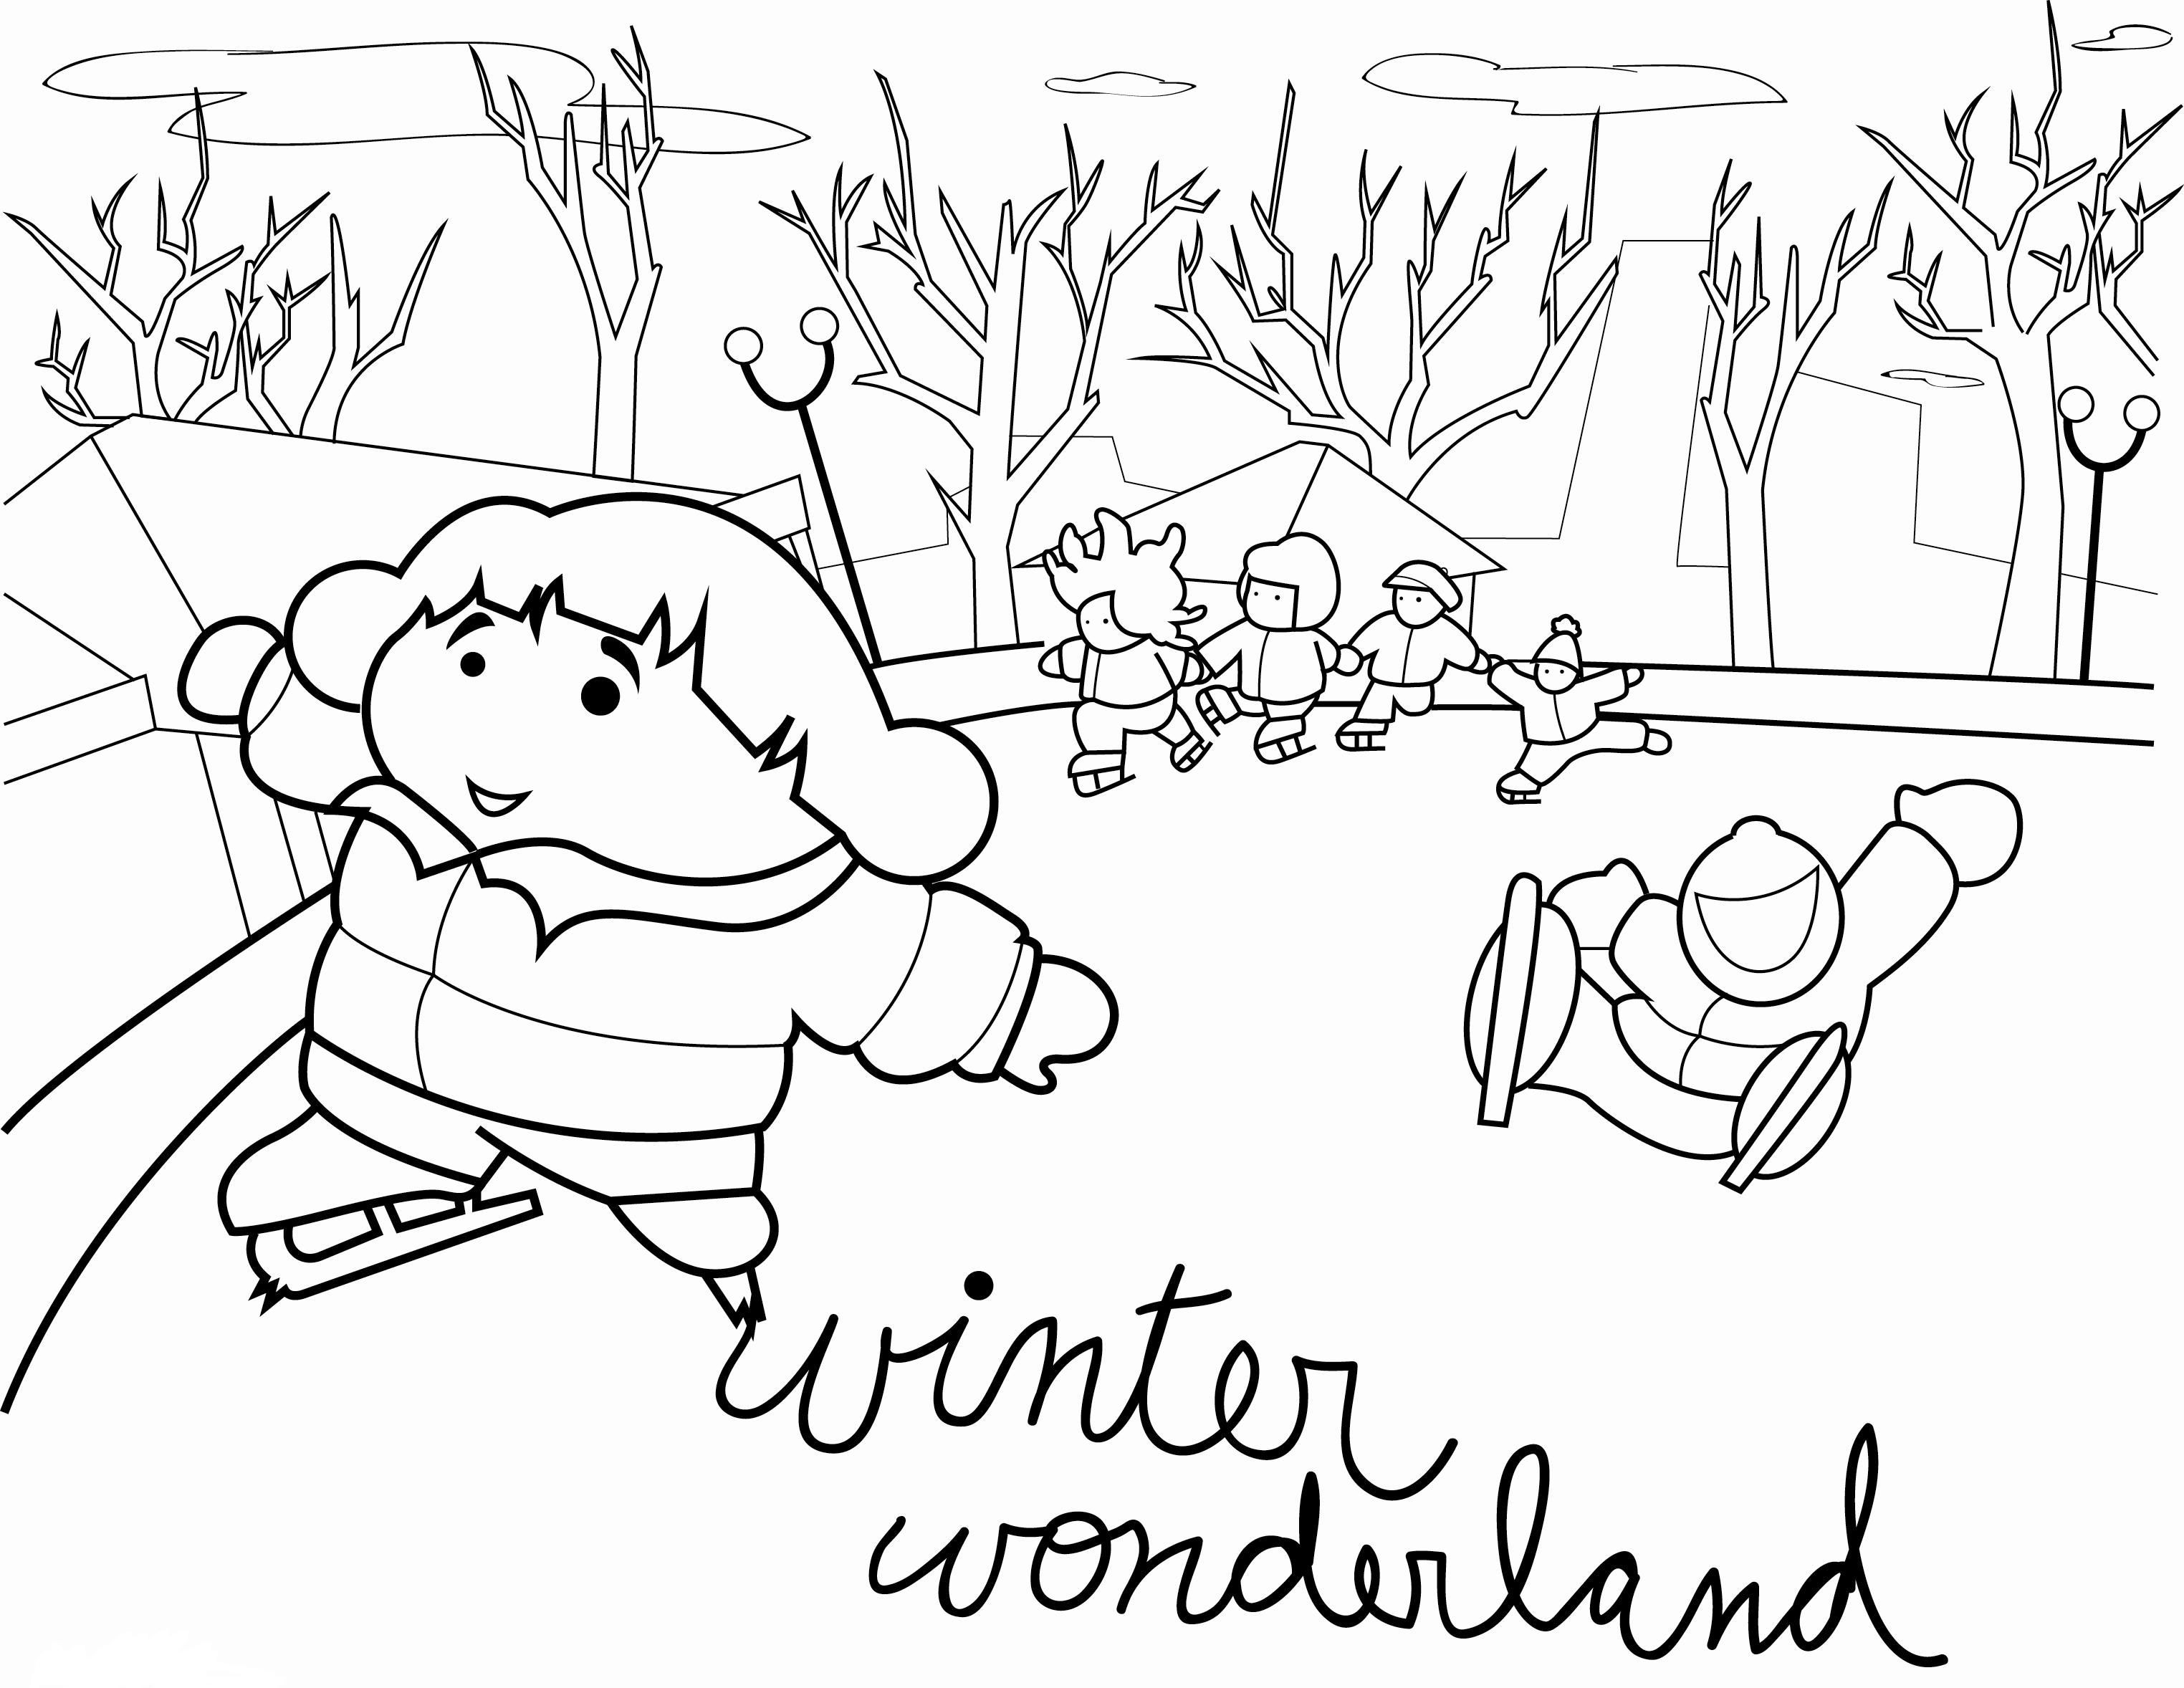 Winter Wonderland Free Coloring Sheets
 Printable Winter Scene Coloring Pages Coloring Home